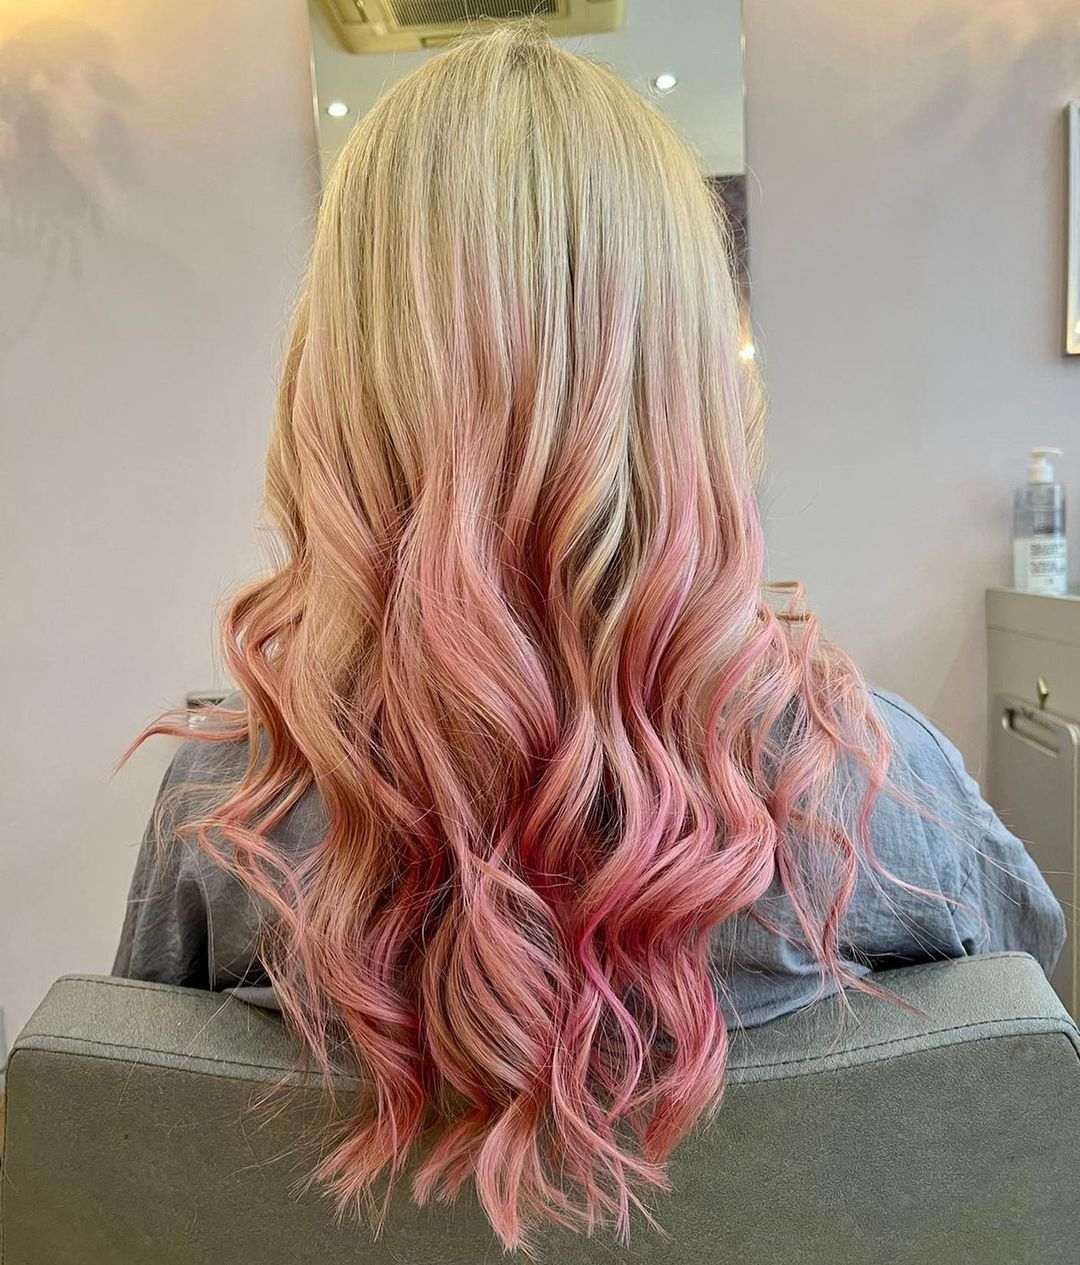 blonde hair with light pink highlights